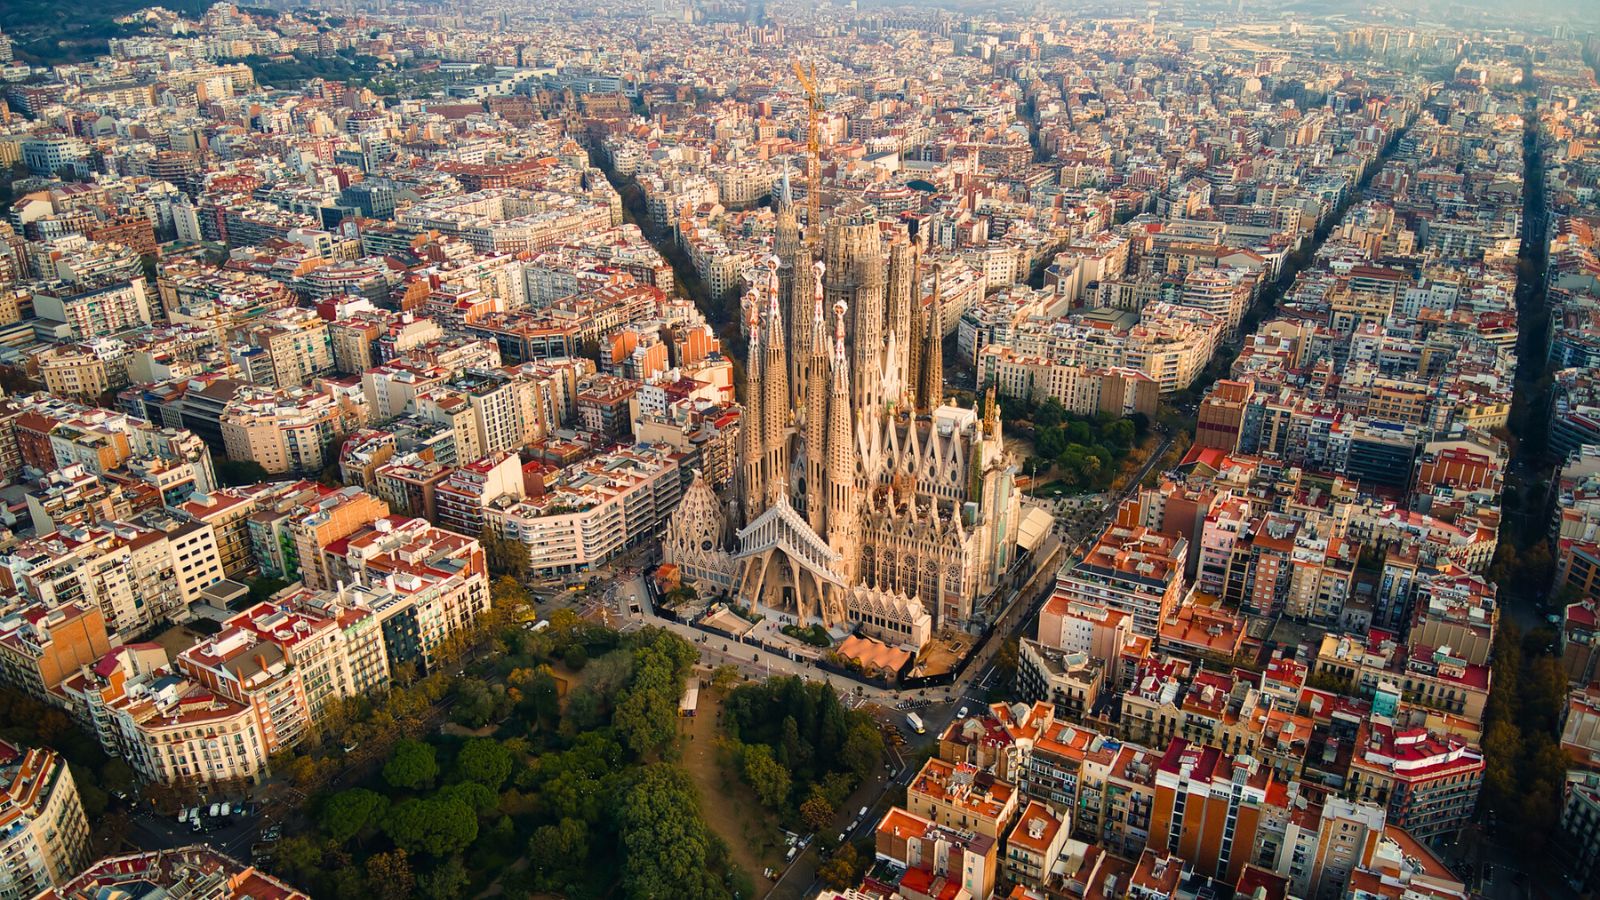 <p><span>Barcelona’s architecture is intertwined with the infamous Catalan architect Antoni Gaudi. His distinctive influence is evident in buildings across the city.</span></p><p><span>Still, the Sagrada Familia – the inimitable unfinished church – is undoubtedly the most famous. Elsewhere, you’ll see exceptional examples of Gothic (e.g. Barcelona Cathedral) and Renaissance Architecture, as well as Modernism, Art Deco, and others.</span></p>